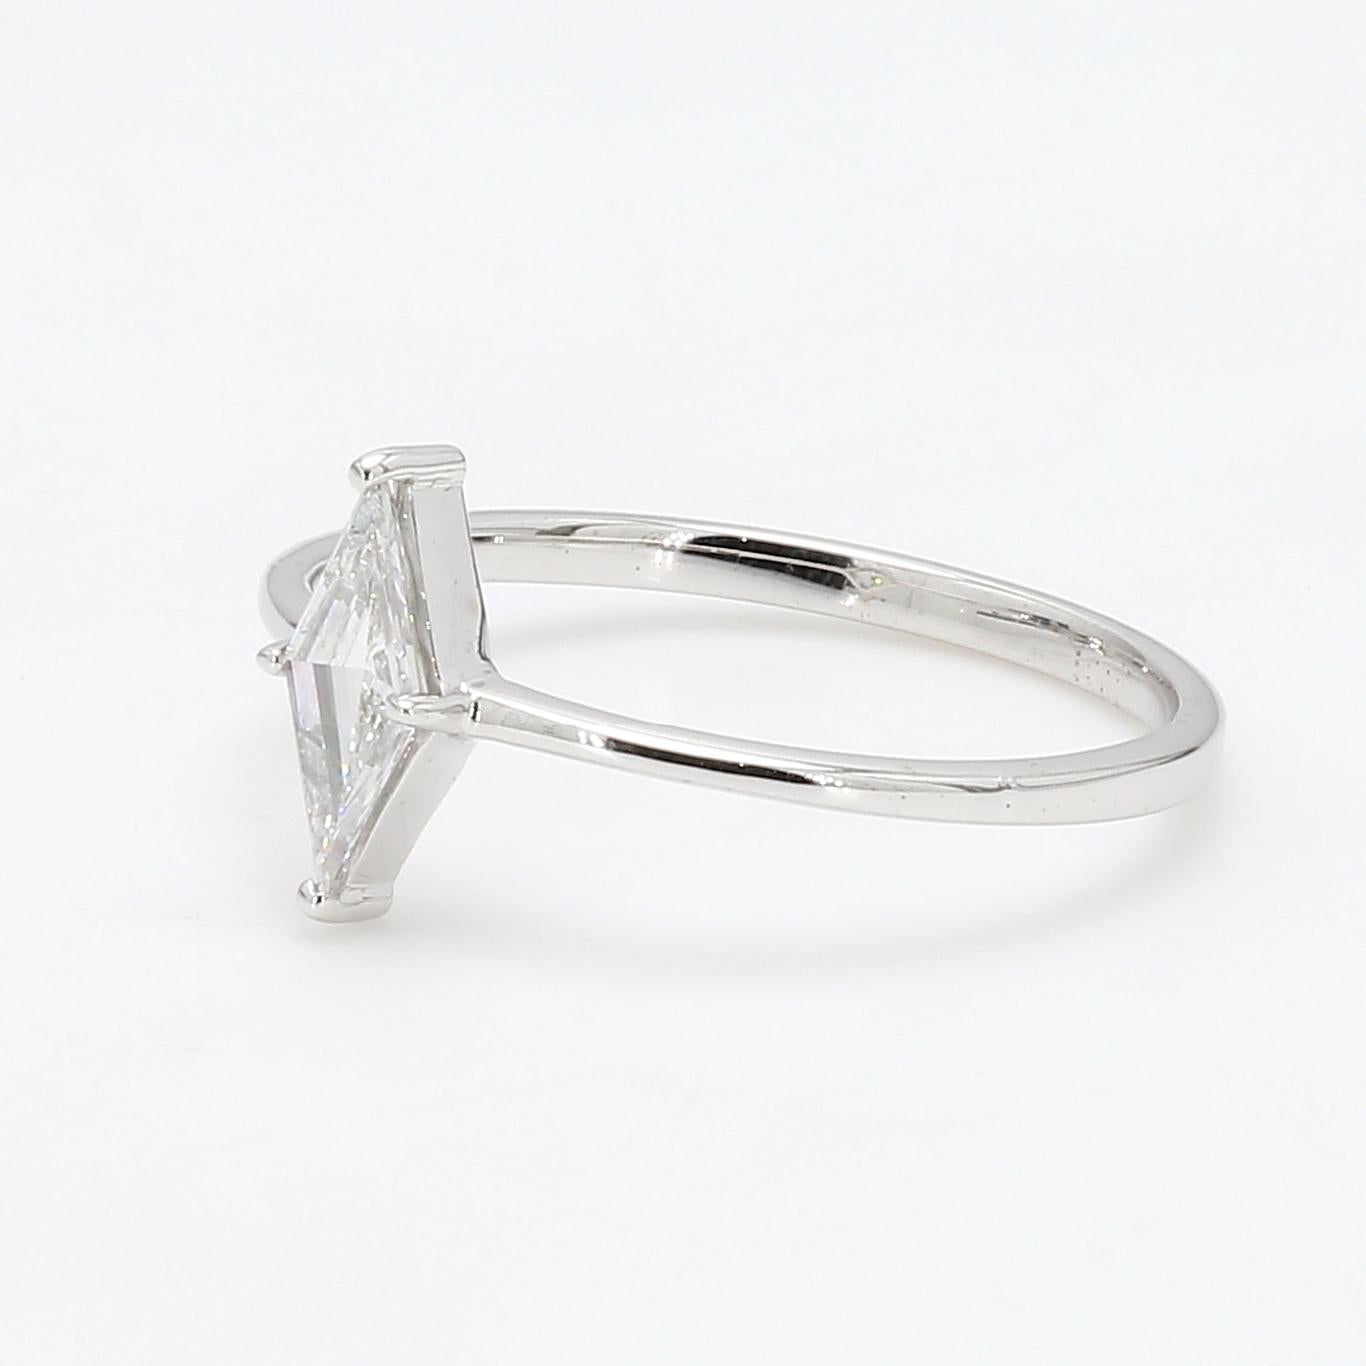 Panim 0.25CTS Kite Shape Diamond 18K White Gold Ring

This Panim ring features a single stone kite shape diamond. Kite cut diamonds are evocative of vintage designs popular in the 1920s. Kite cut diamonds are also referenced as shield cut diamonds,